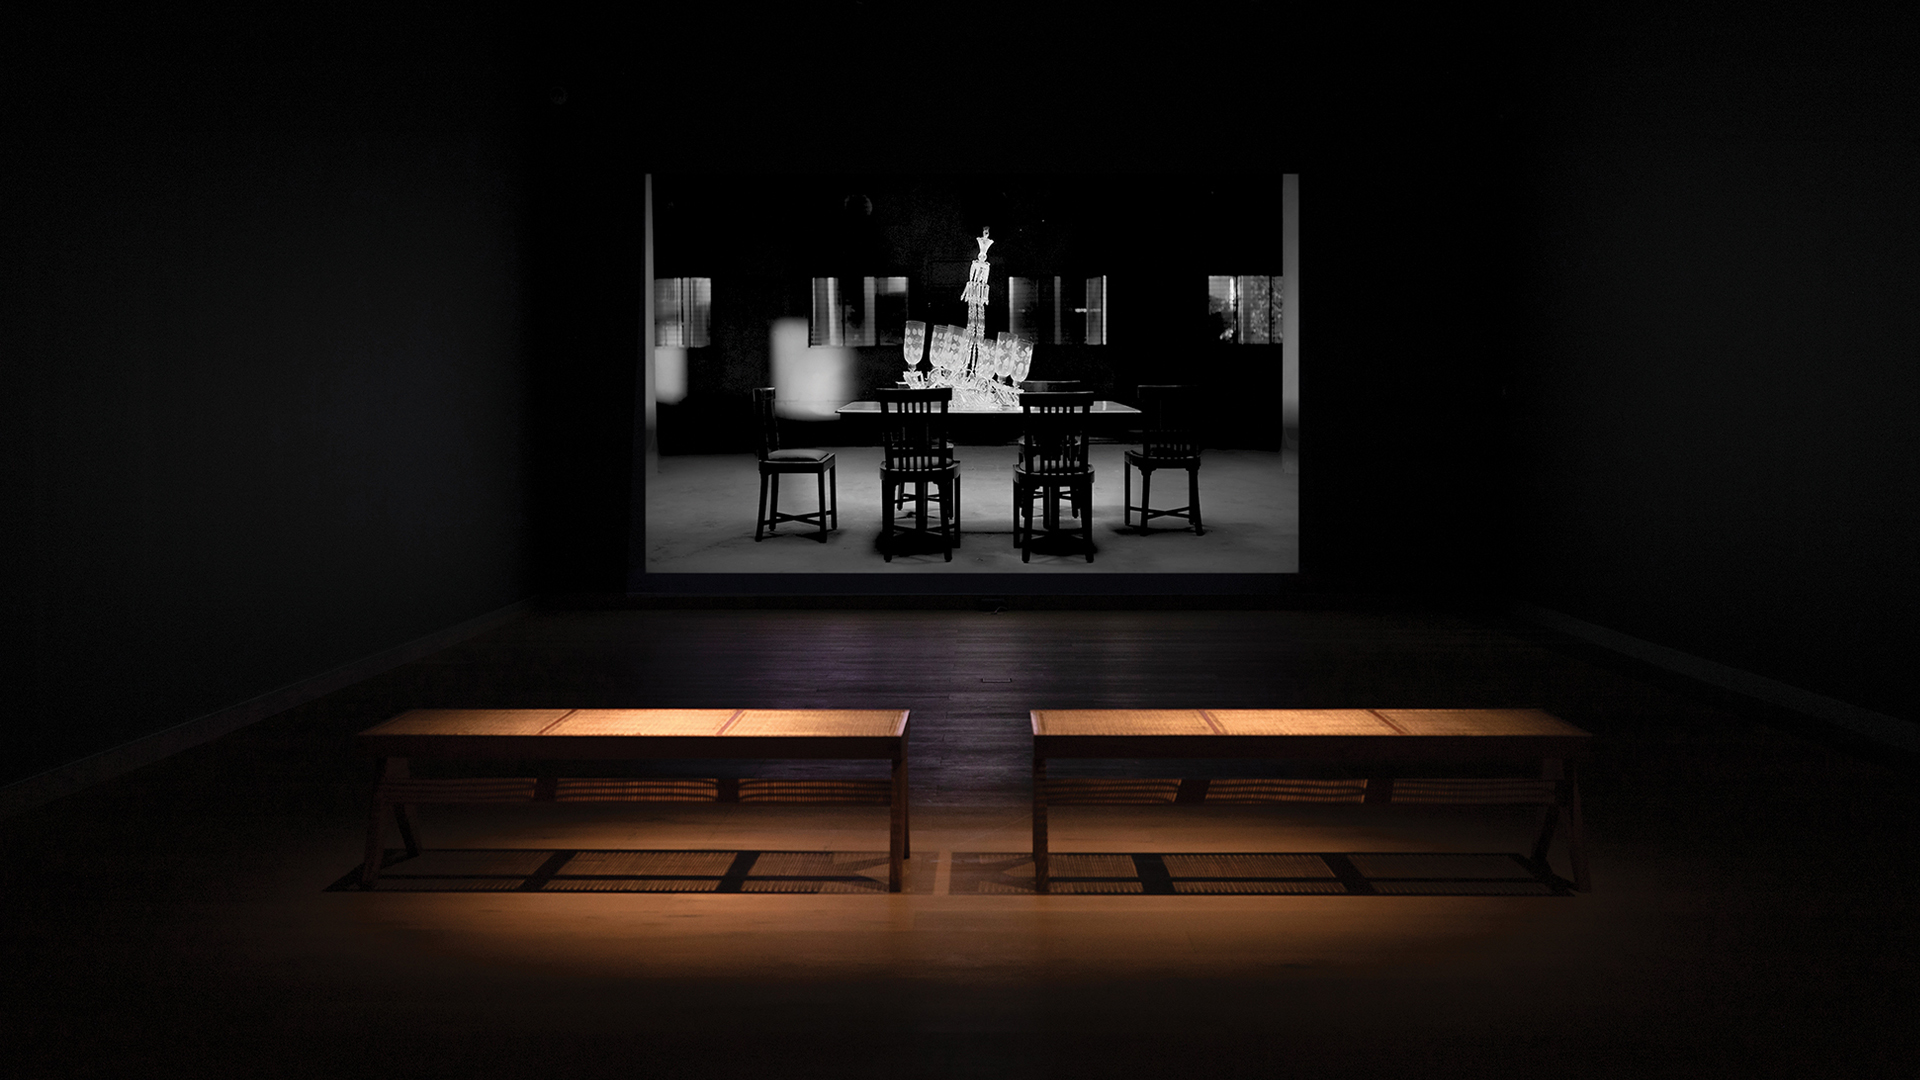 Sudarshan Shetty, Installation view of Age of Love (2019). Single channel film, 15:48 minutes. Shown in Only Life, Myriad Places: Sudarshan Shetty at Ishara Art Foundation, 2023. Image courtesy Ishara Art Foundation and the artist. From the collection of Kiran Nader Museum of Art